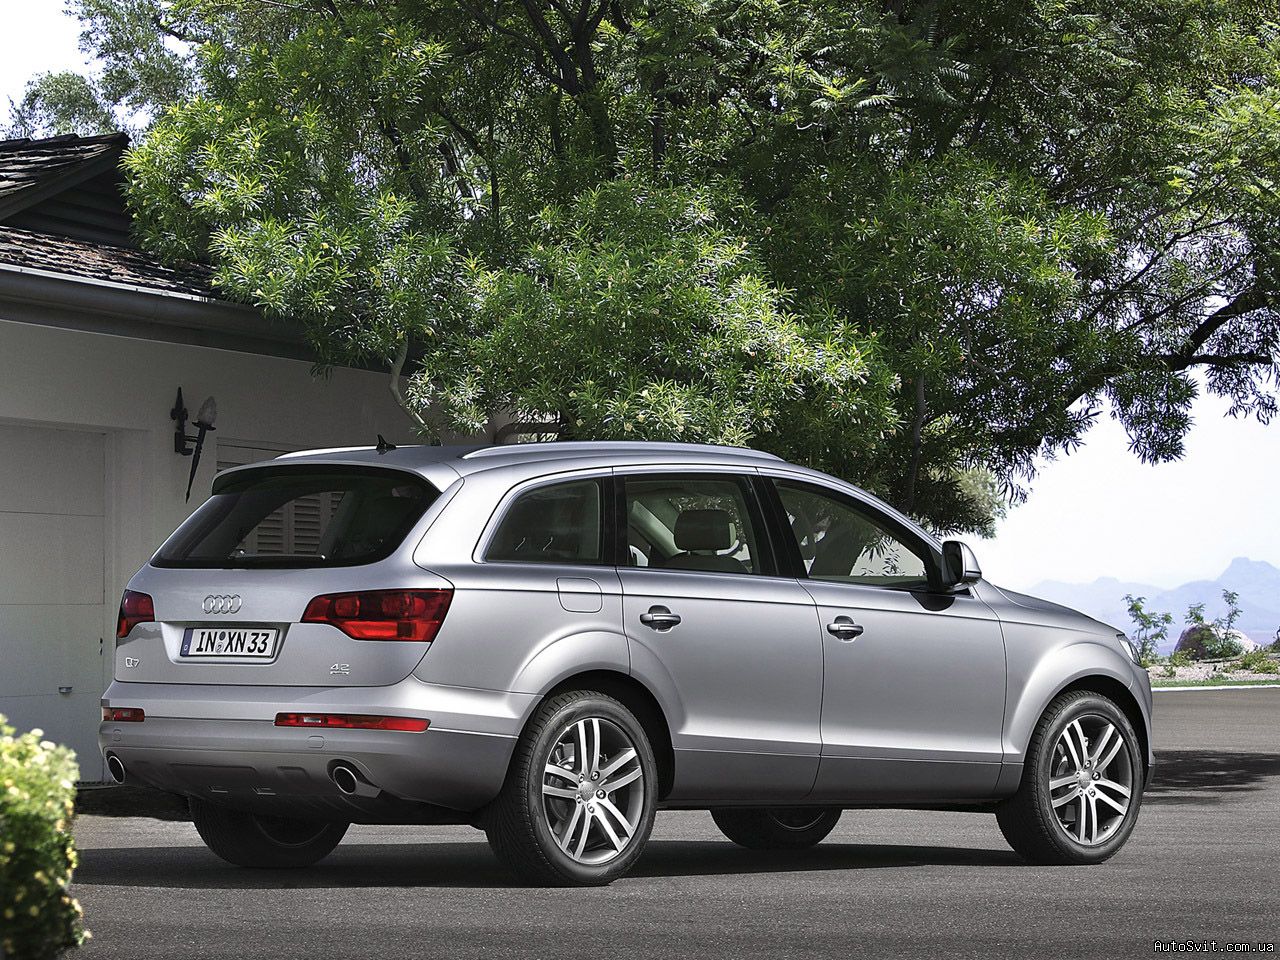 Audi Q7 2005: Review, Amazing Pictures and Images - Look at the car